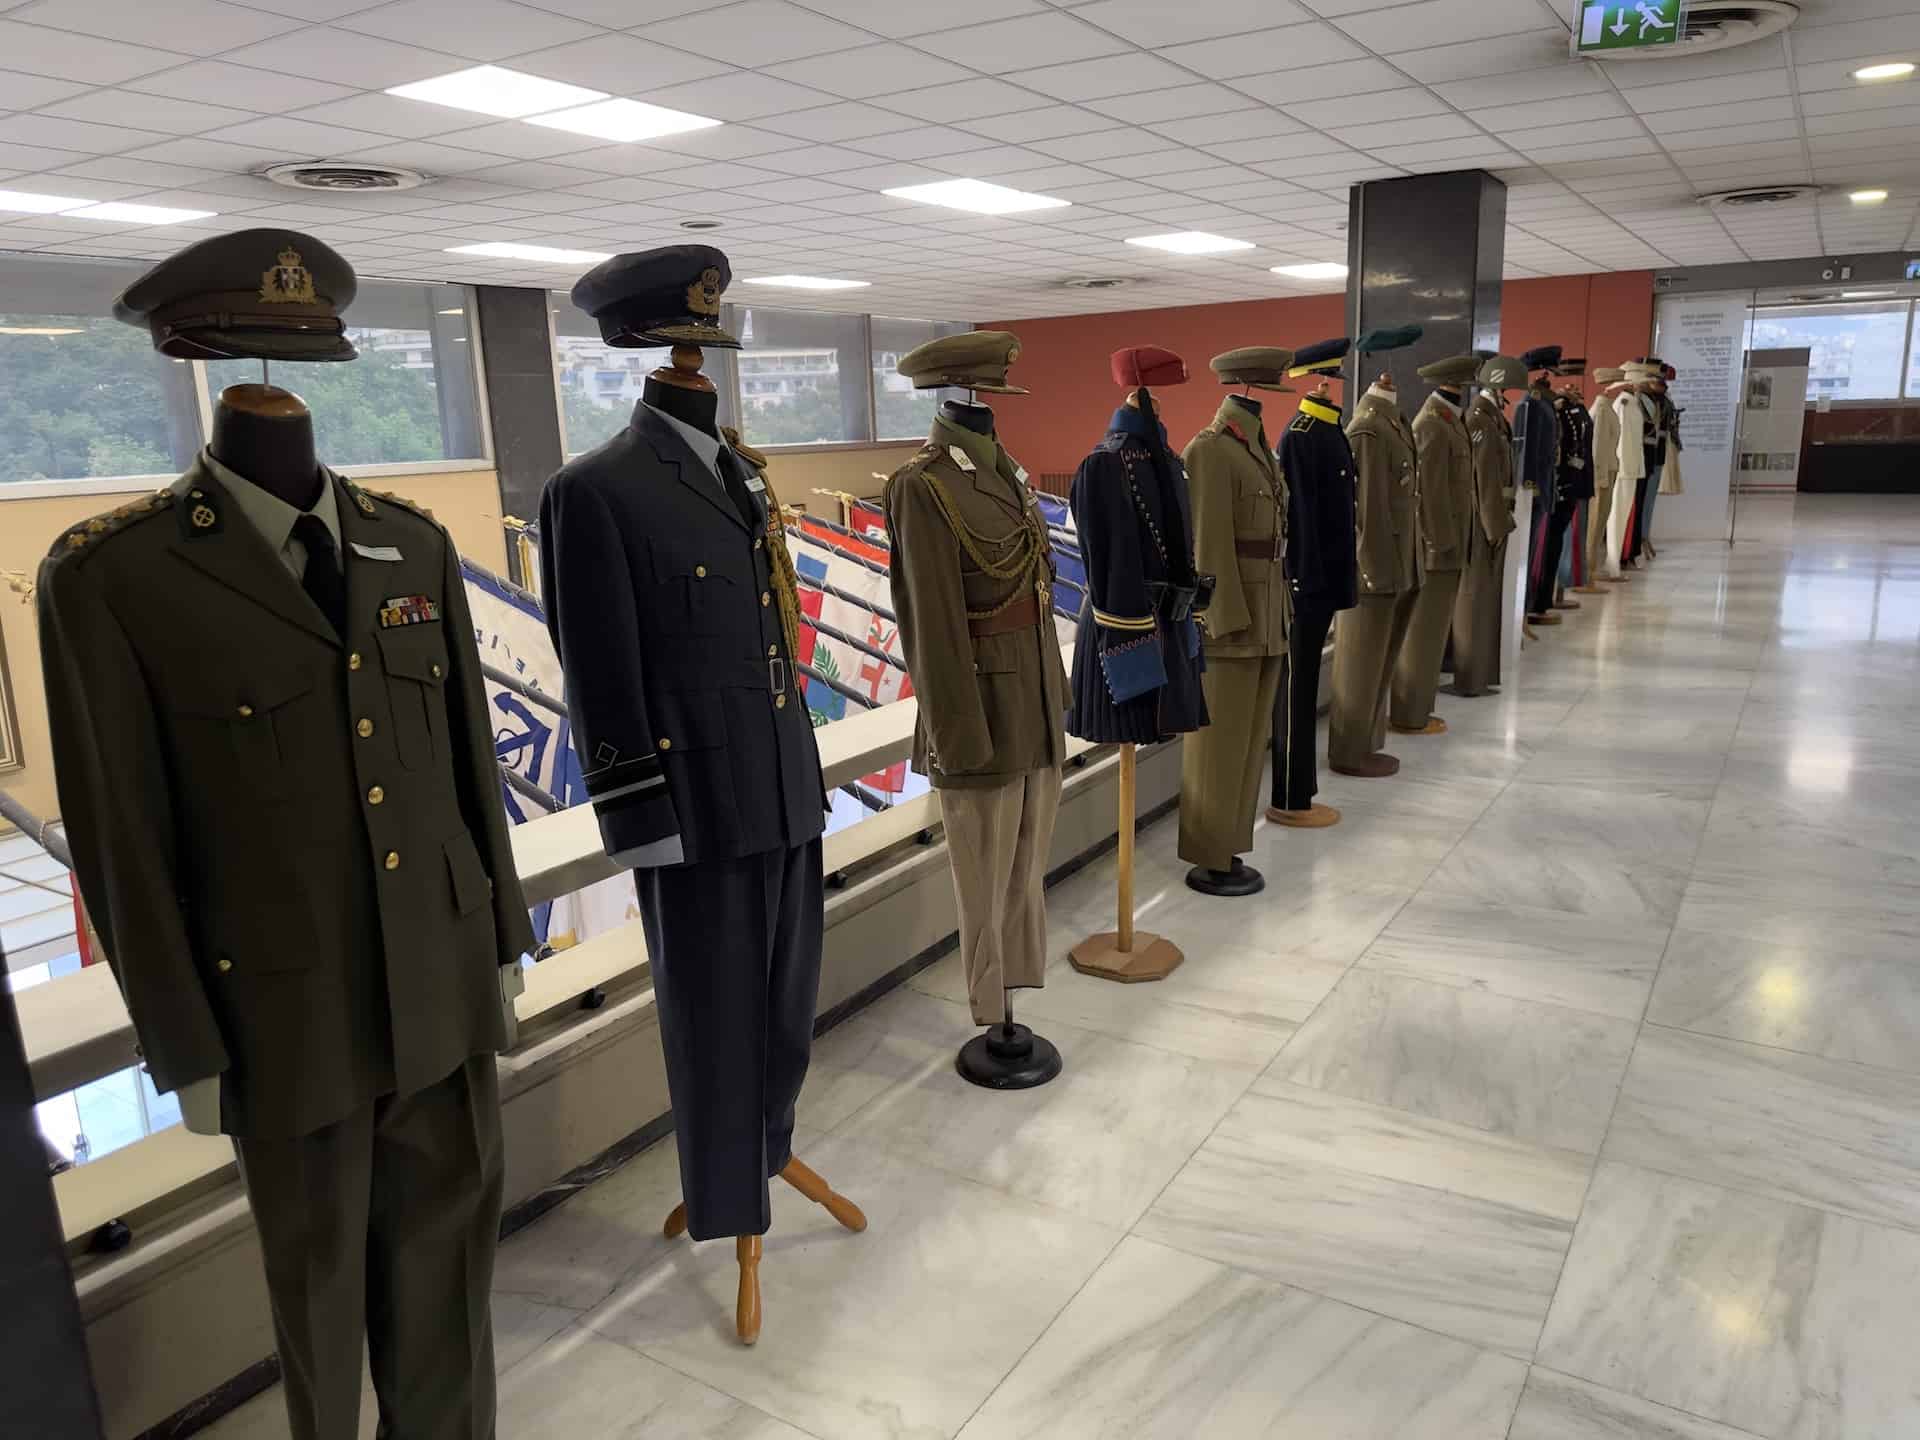 Uniforms at the War Museum in Athens, Greece